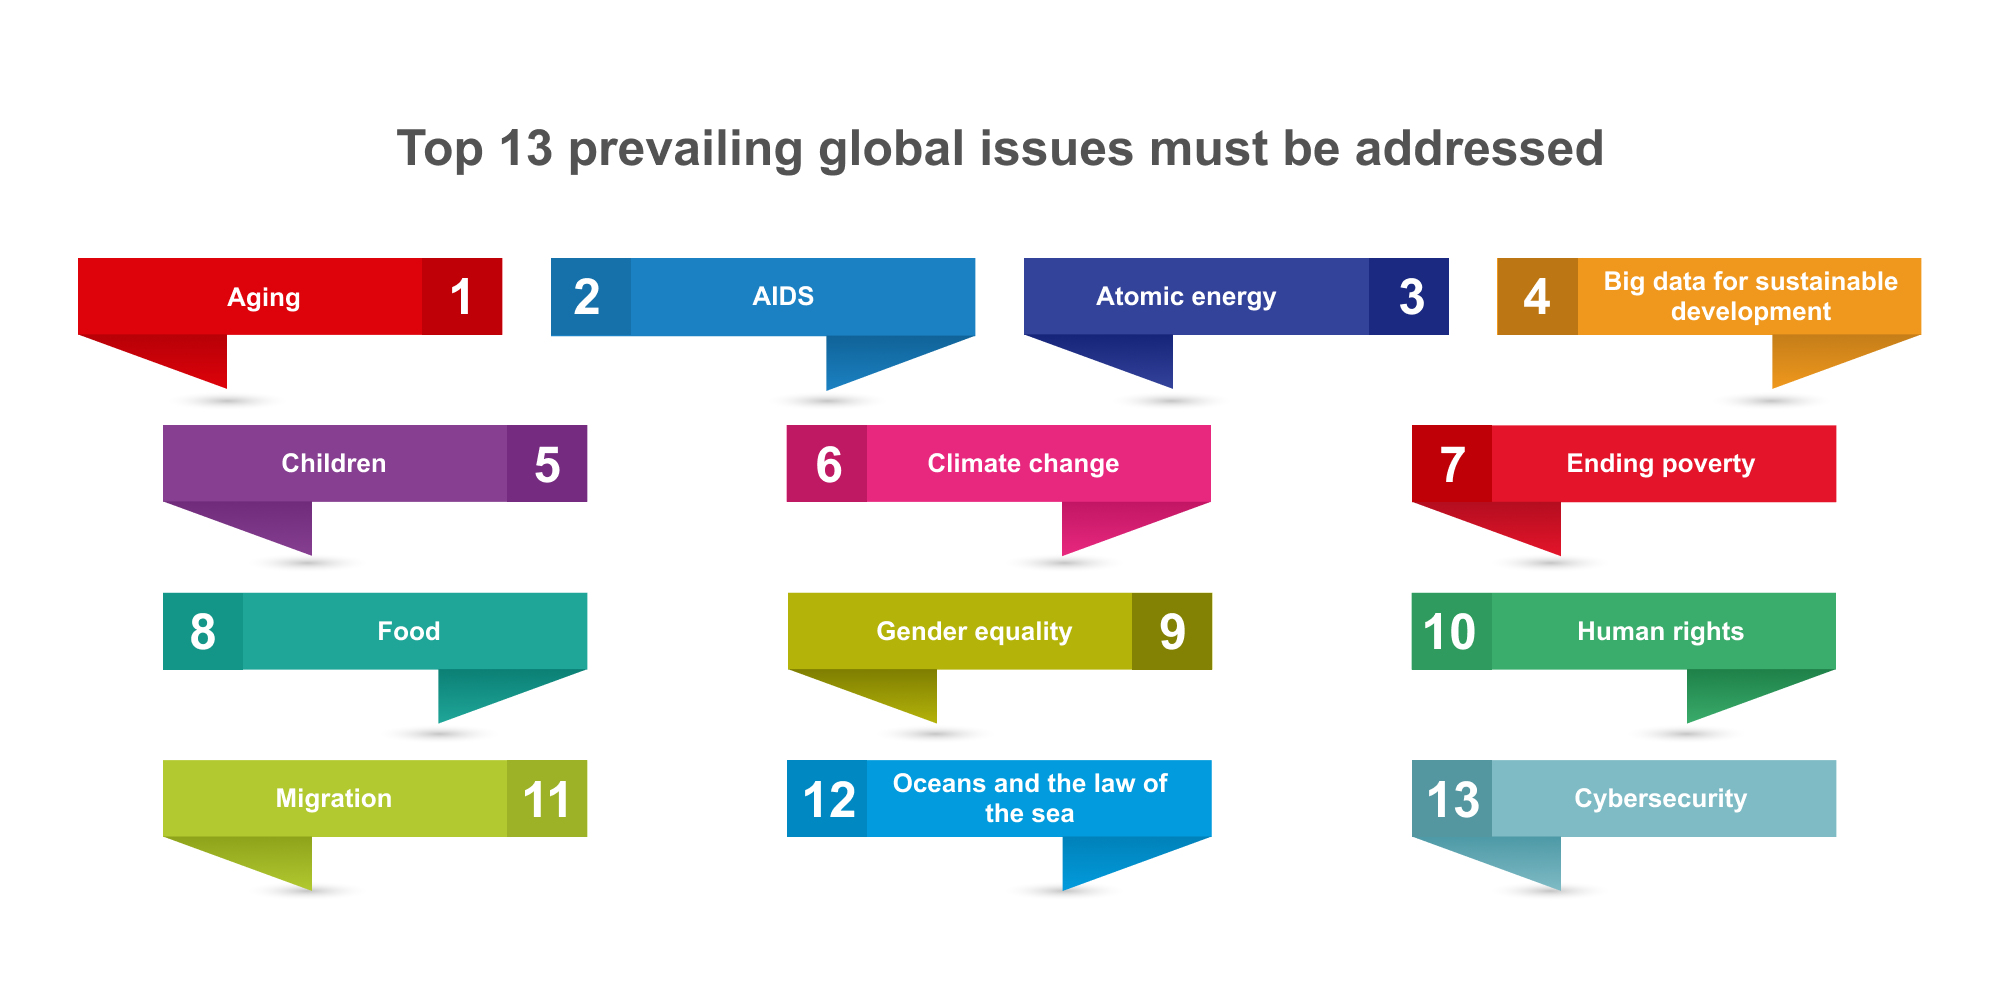 The critical Global Issues to Be Addressed